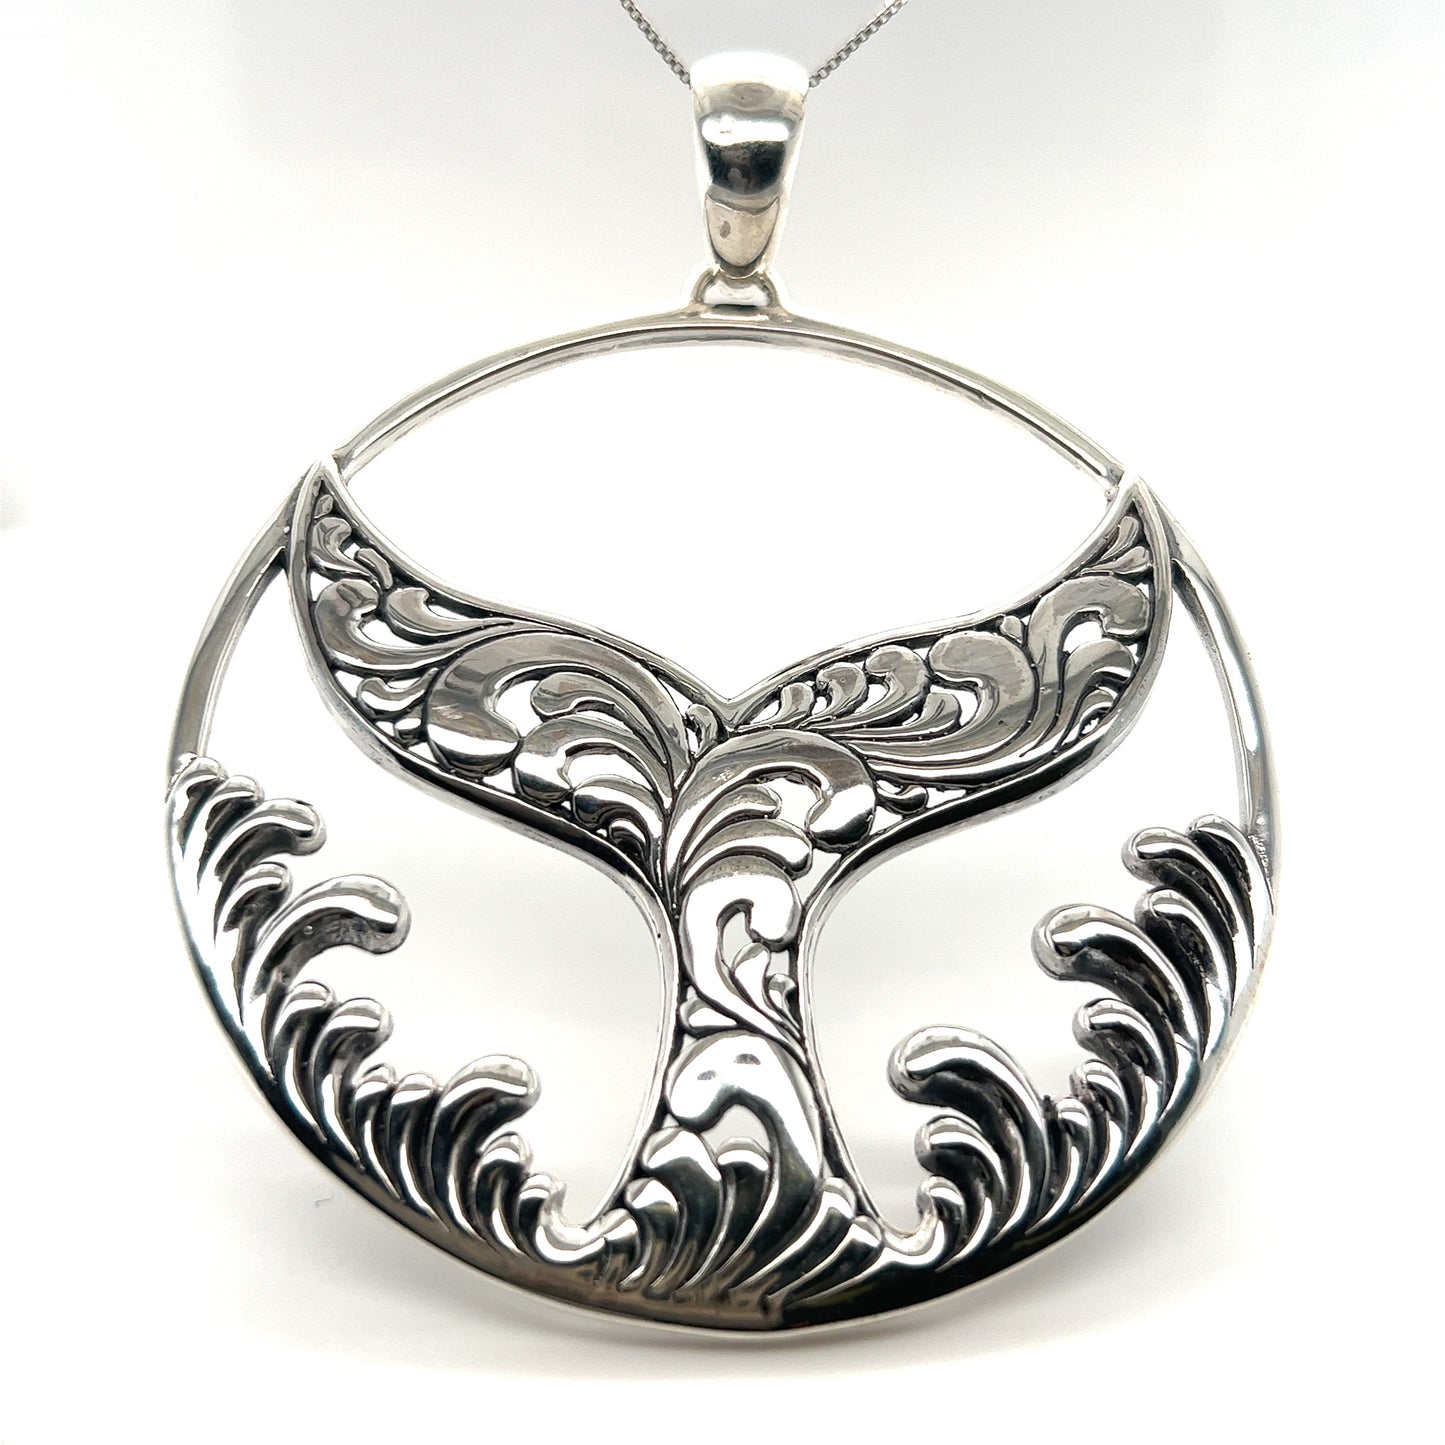 A Extravagant Whale Tail Pendant with a sterling silver pendant, perfect for ocean lovers and those with a connection to Santa Cruz, by Super Silver.